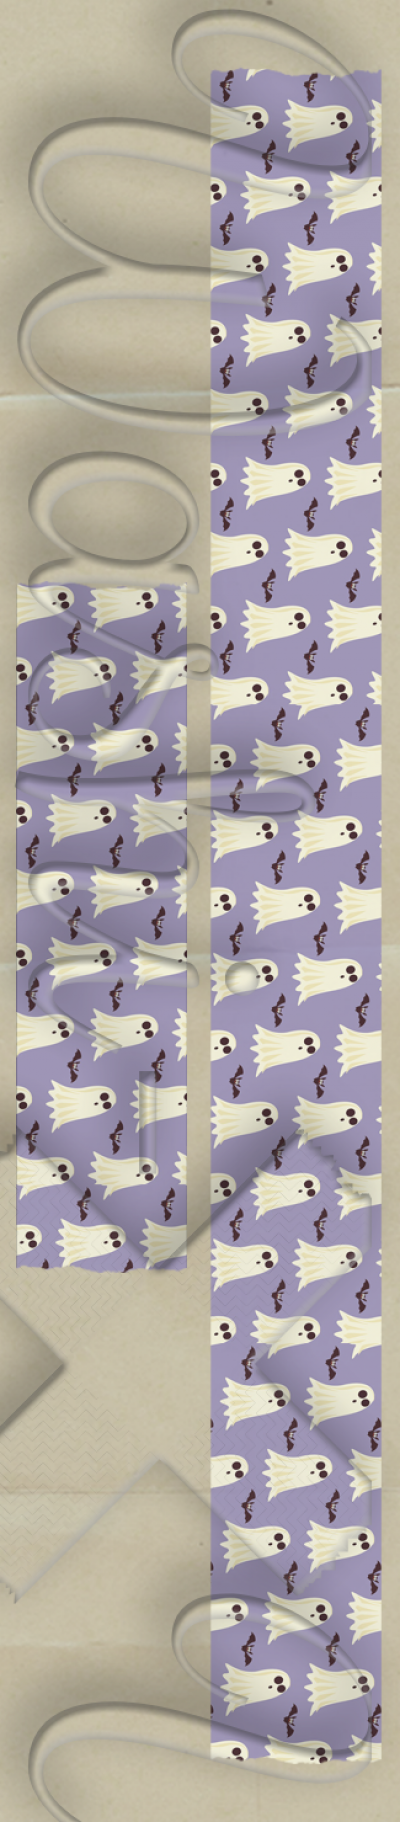 Ghosts patterned washi tape